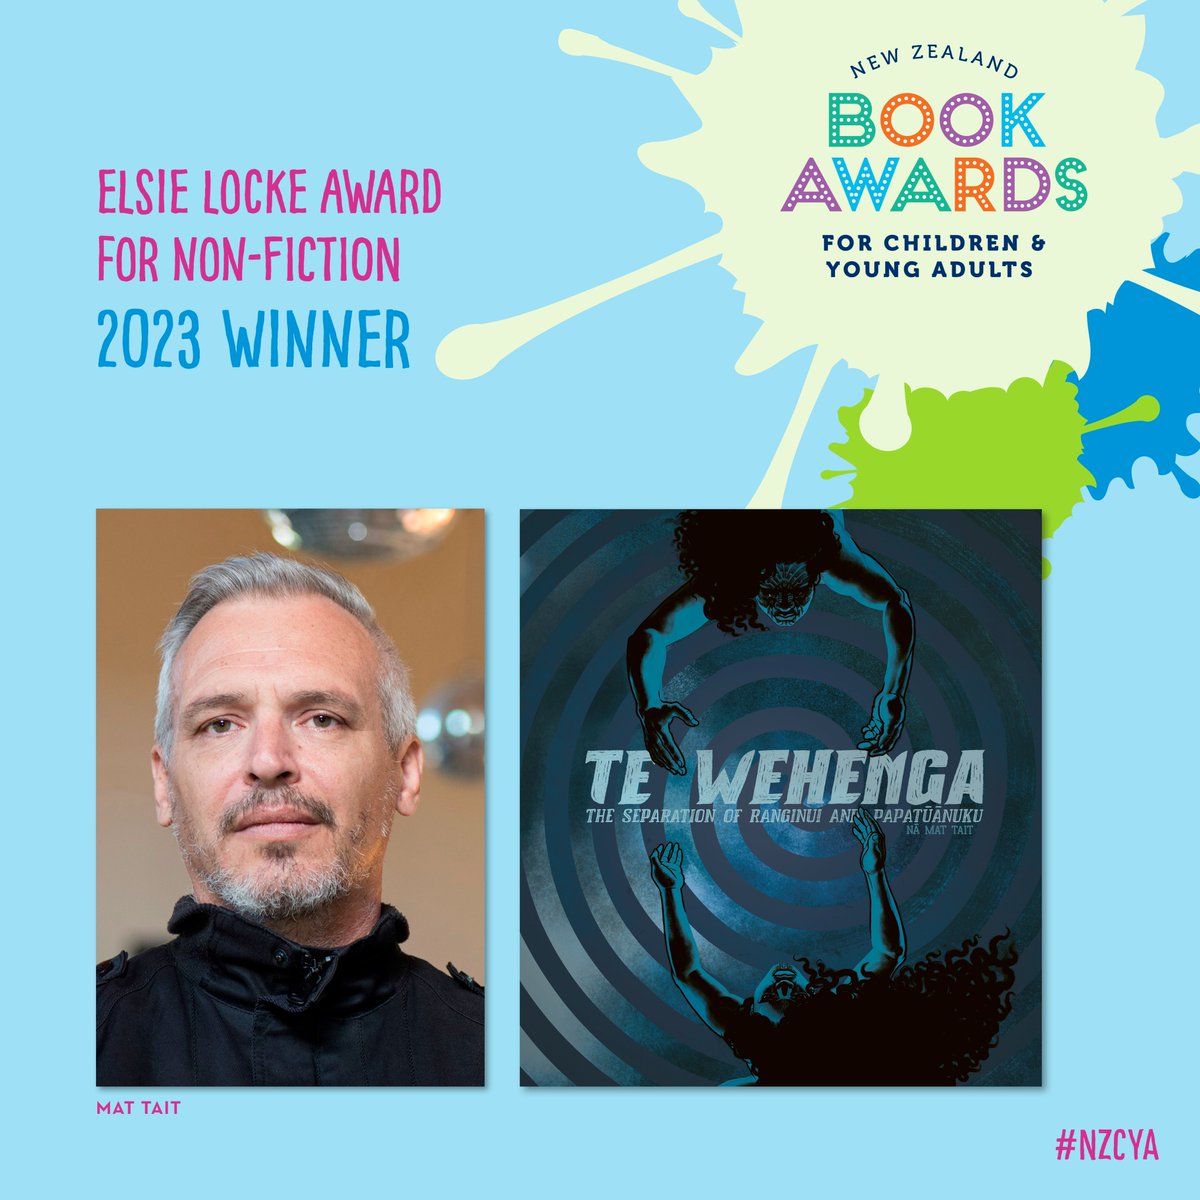 The Elsie Locke Award for Non-Fiction goes to 'Te Wehenga: The Separation of Ranginui and Papatūānuku’ by Mat Tait, published by @AllenAndUnwinNZ. The judges were “awestruck by its production qualities and by the bold, dark and fully immersive design”. #NZCYA